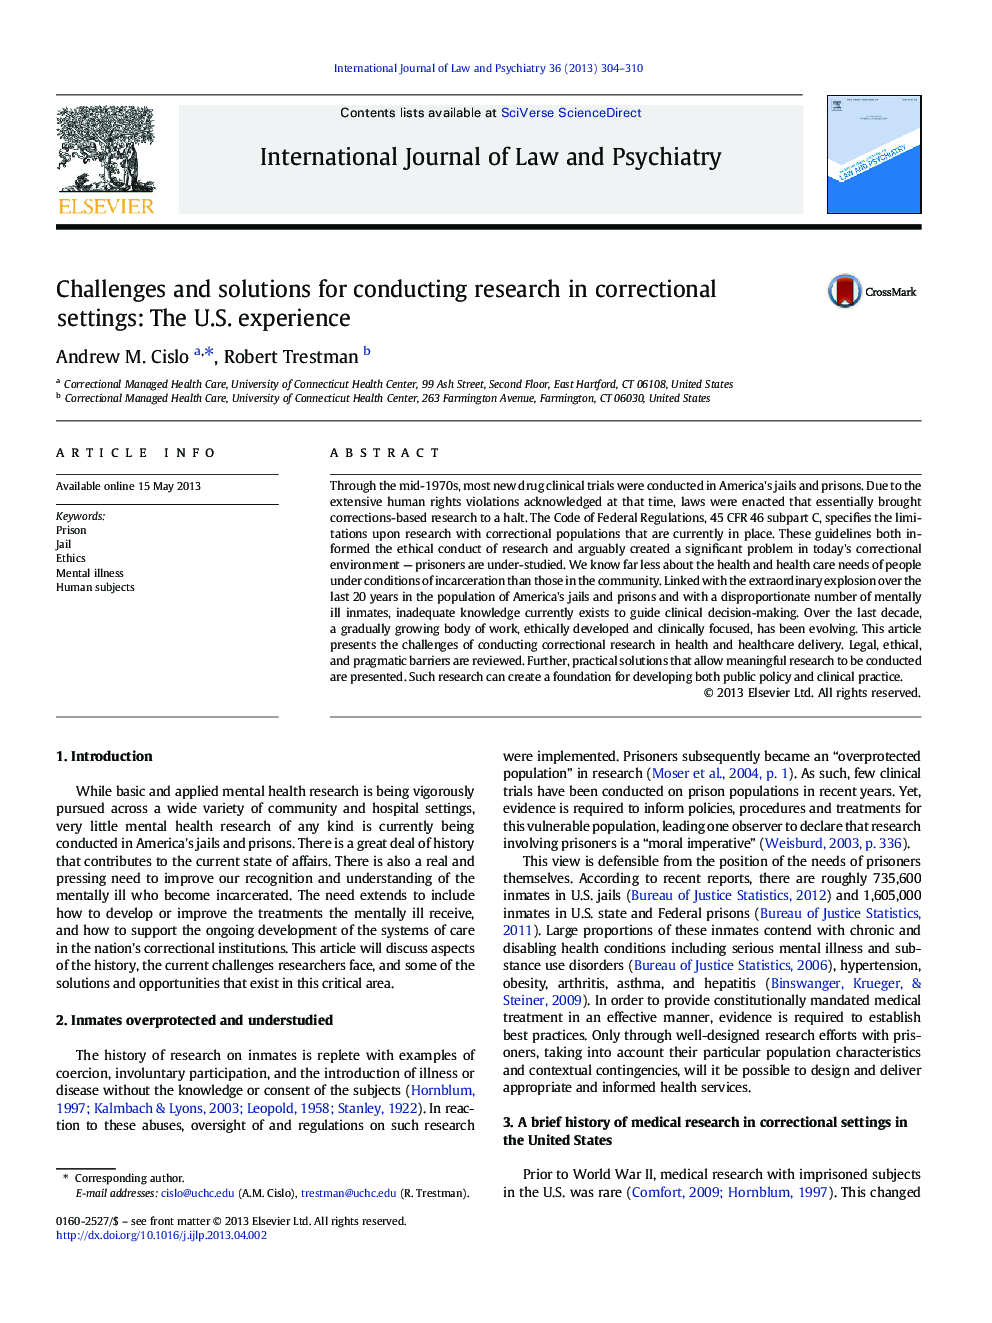 Challenges and solutions for conducting research in correctional settings: The U.S. experience